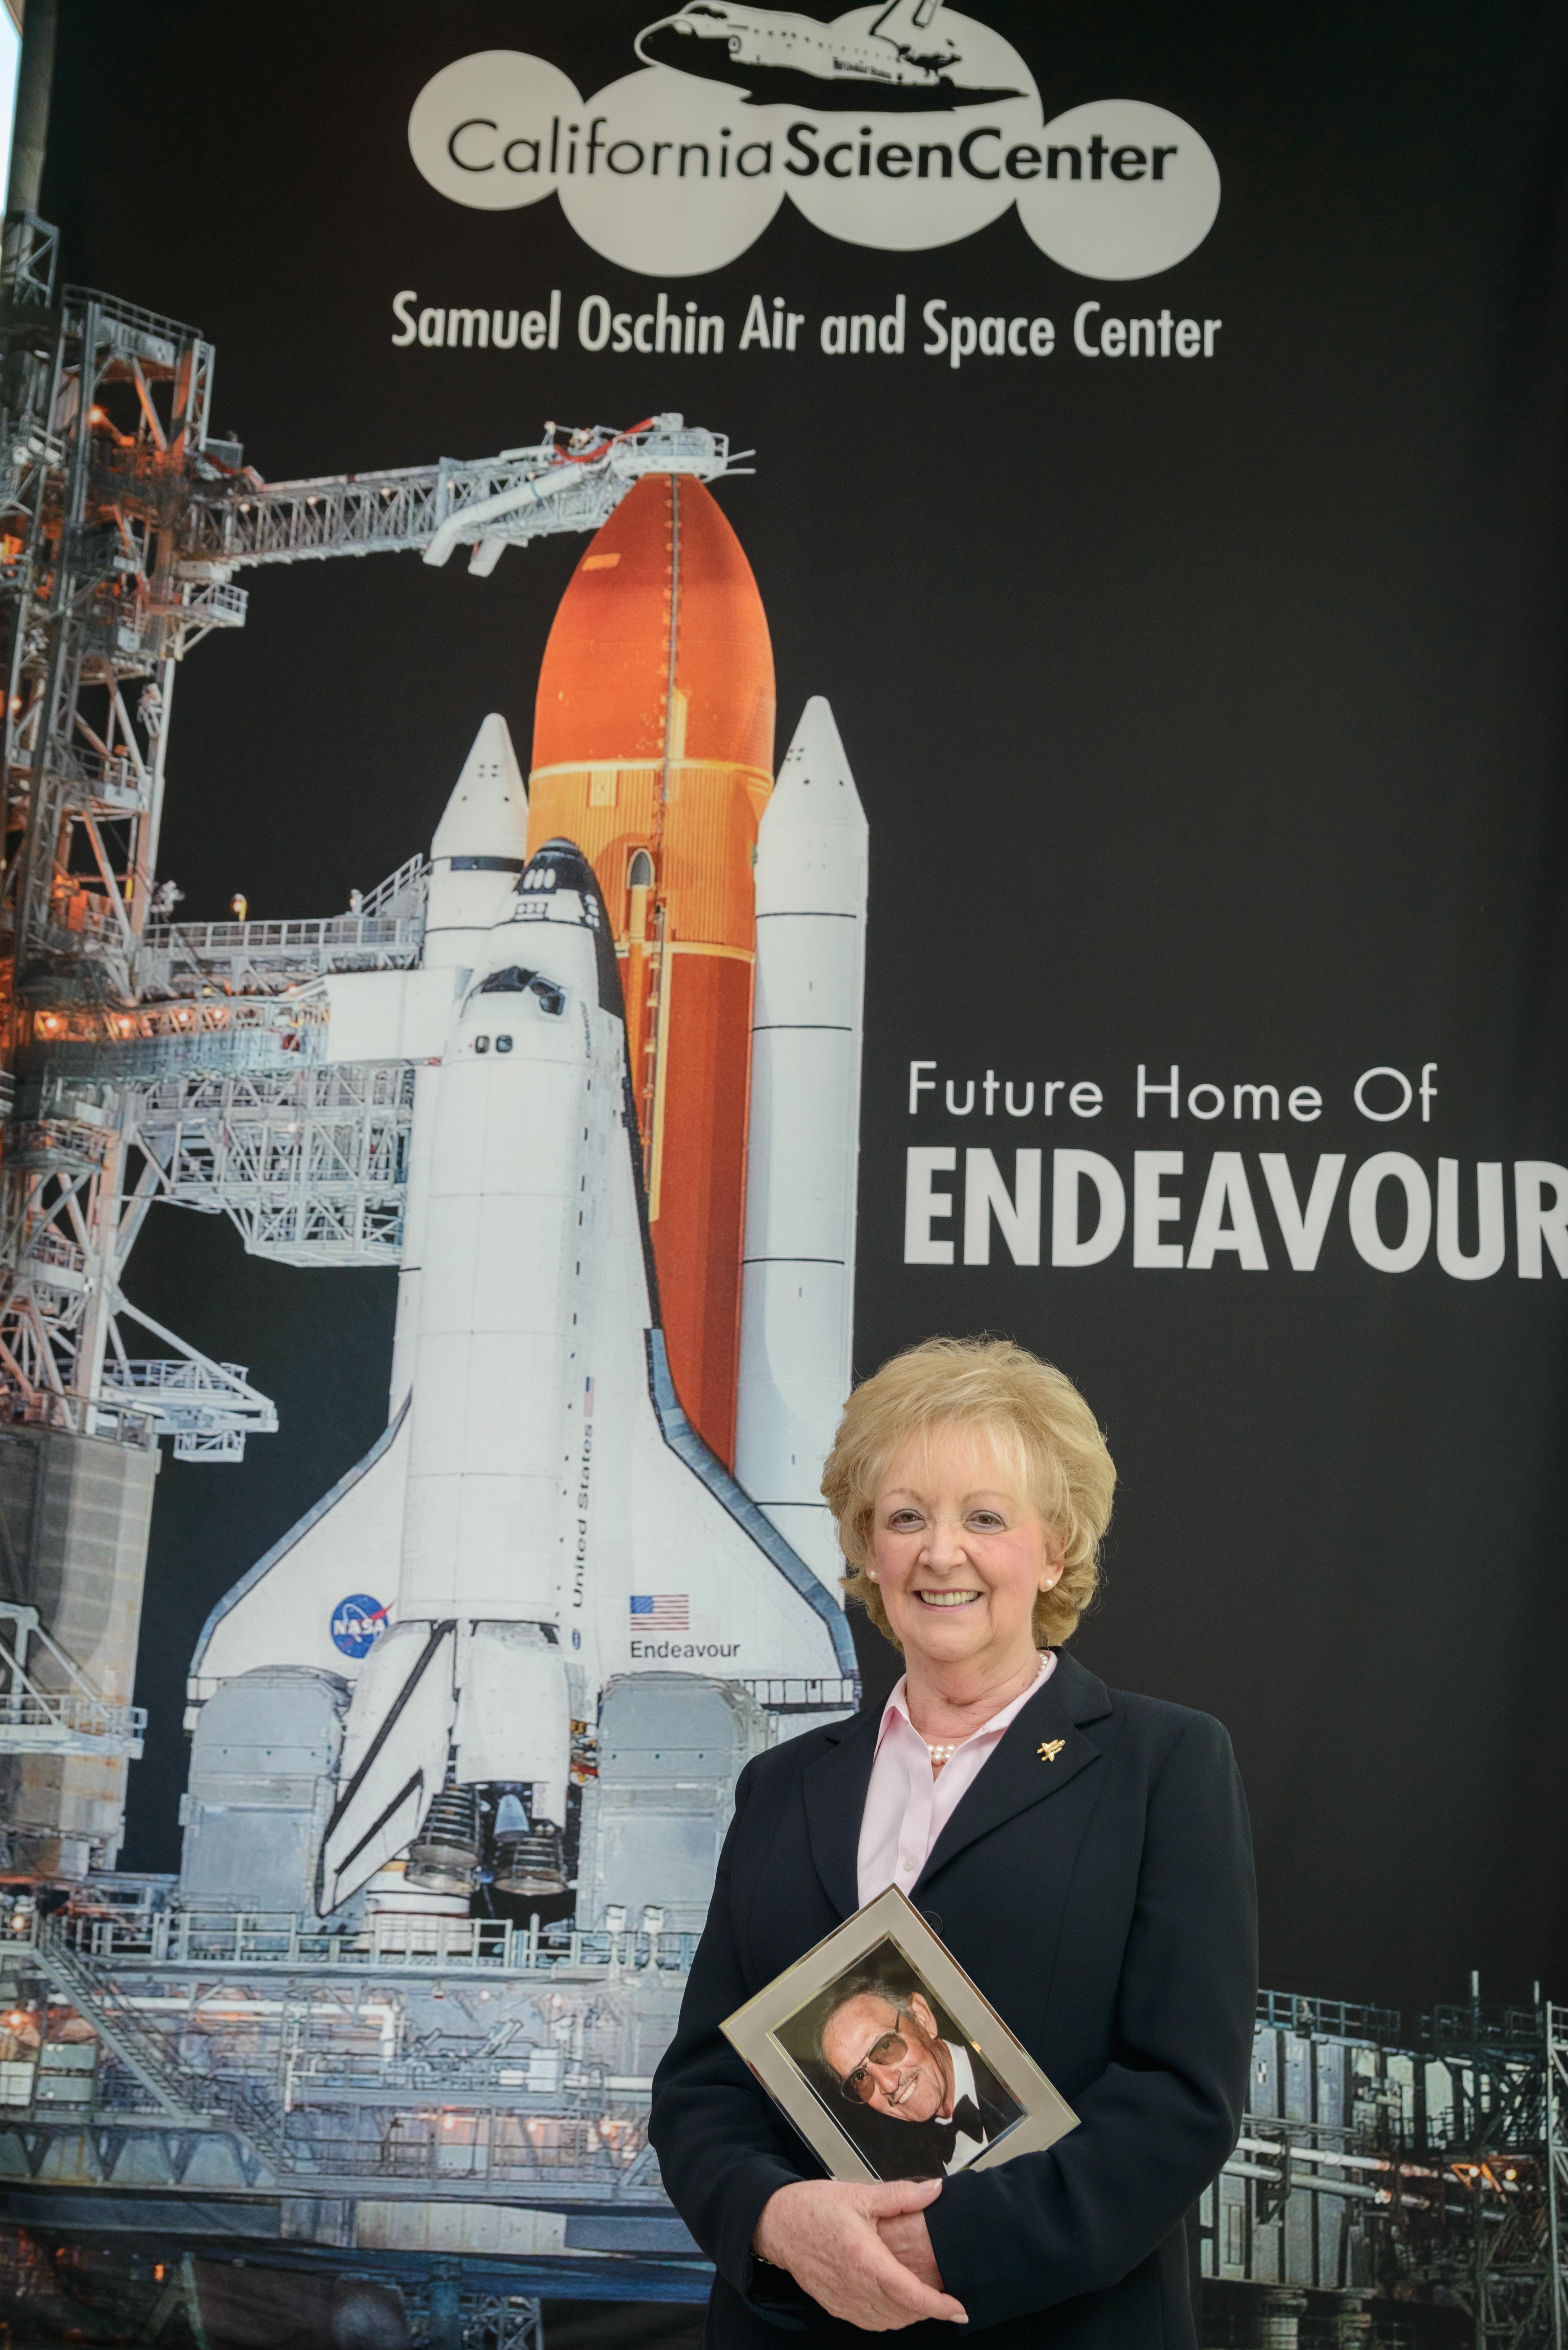 Lynda Oschin standing in front of large banner banner that says "Future home of Endeavour" while holding a portrait of Samuel Oschin